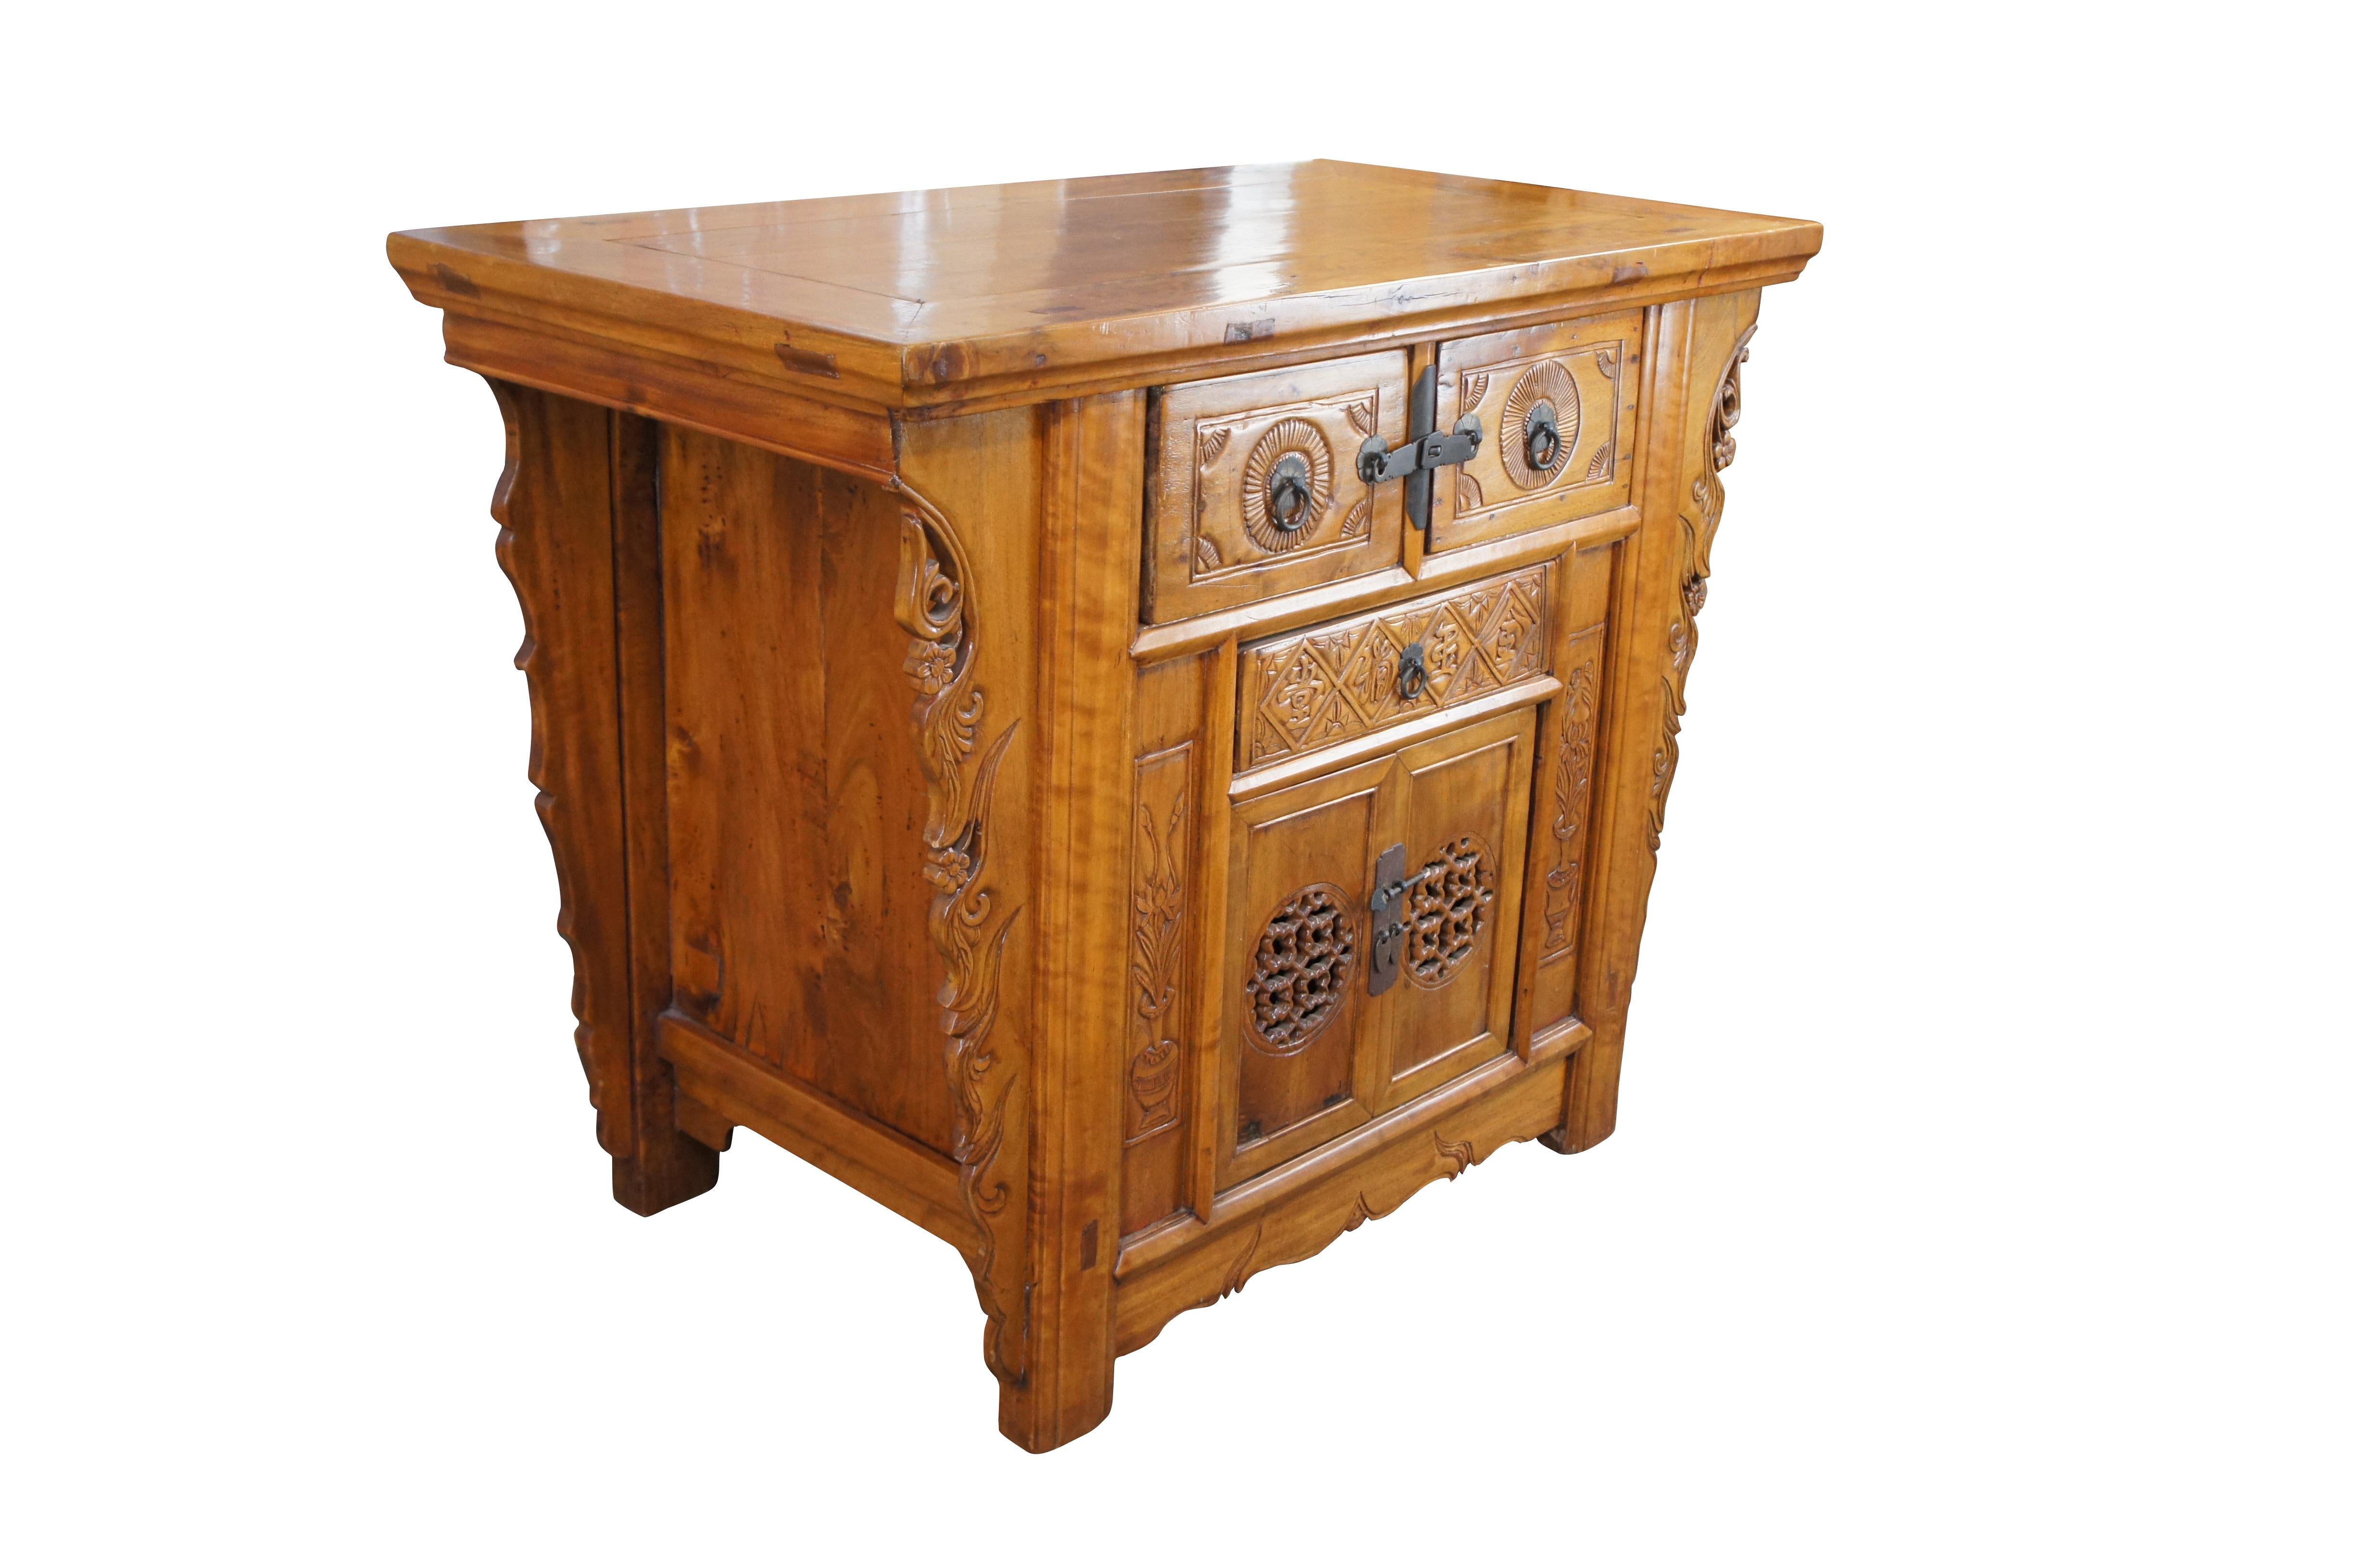 Antique Qing Dynasty altar cabinet, circa 1880s. Features a rectangular form made from elm via mortise and tenon construction. The front is carved with pierced foliate, fretwork, calligraphy and urns. Includes three dovetails drawers and a lower